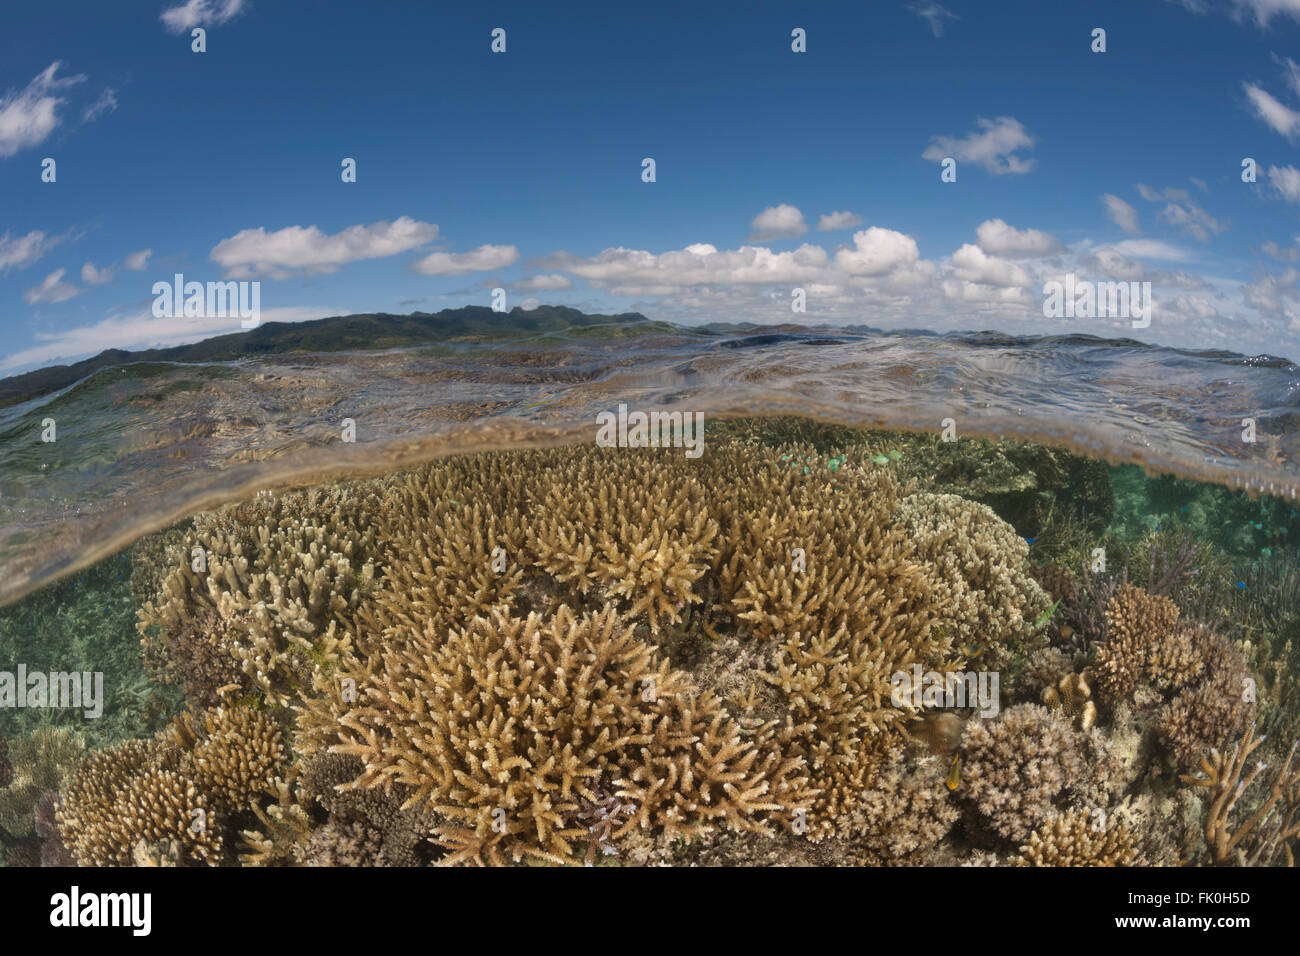 Healthy coral reefs with abundant marine life in tambo or marine protected areas - split level. Stock Photo